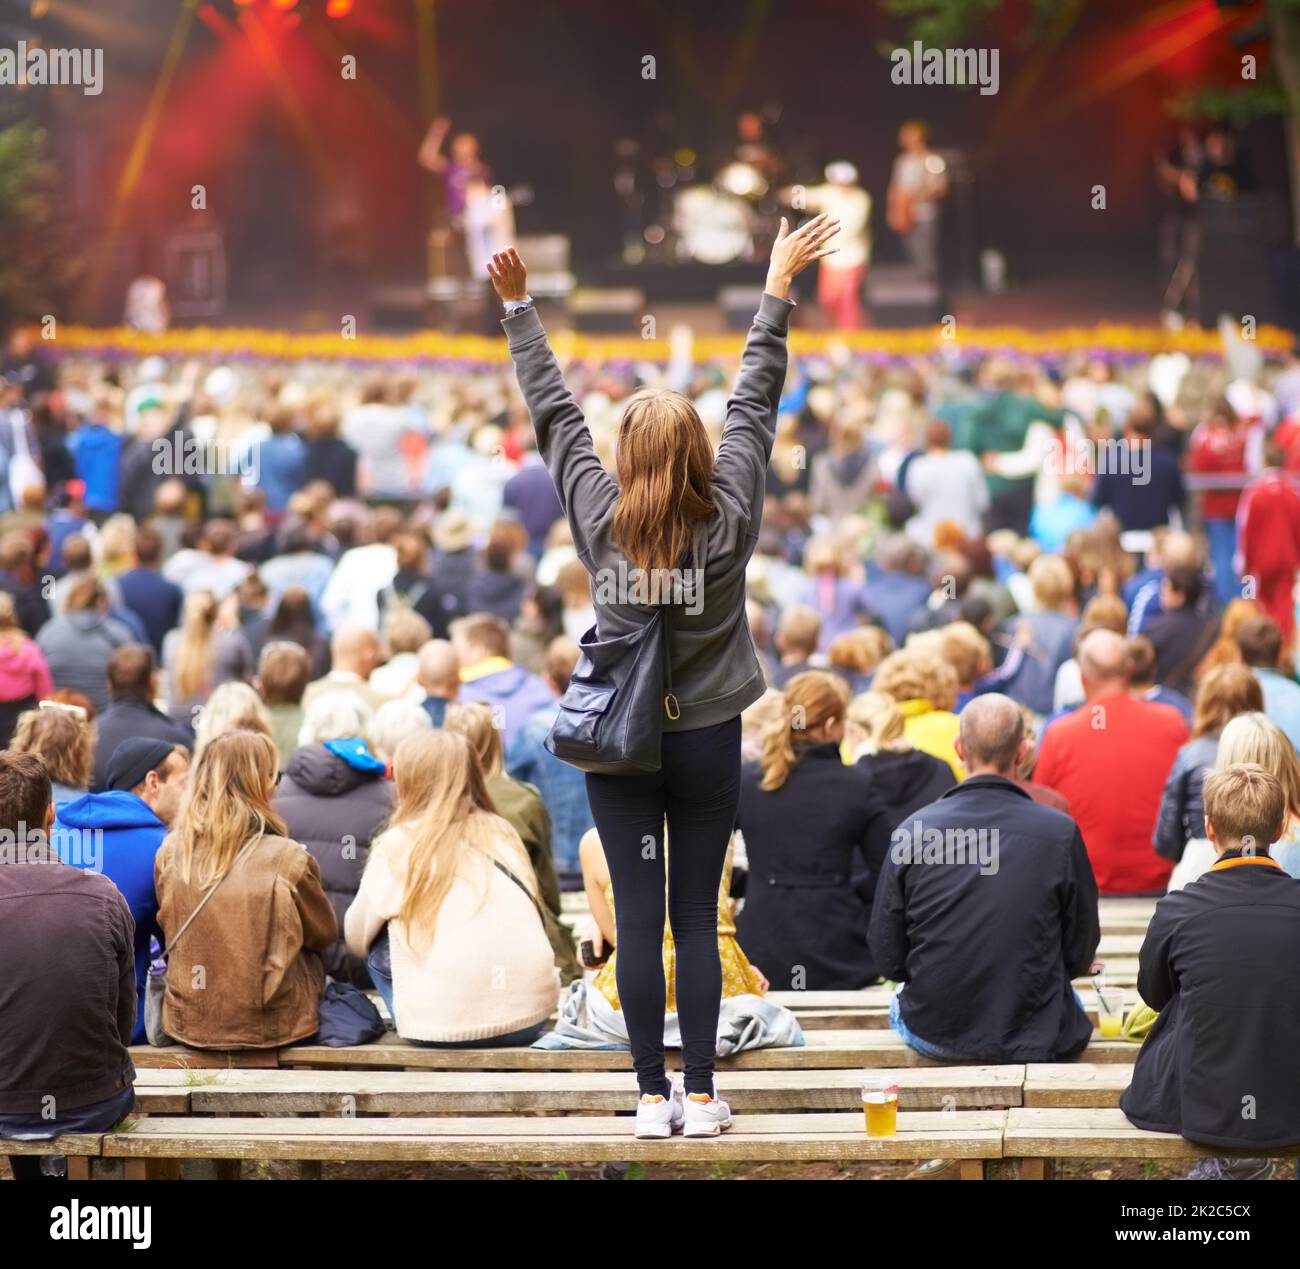 Guess whos her favourite band.... Rear-view shot of a crowd at an outdoor music festival with the focus on a female fan cheering. Stock Photo